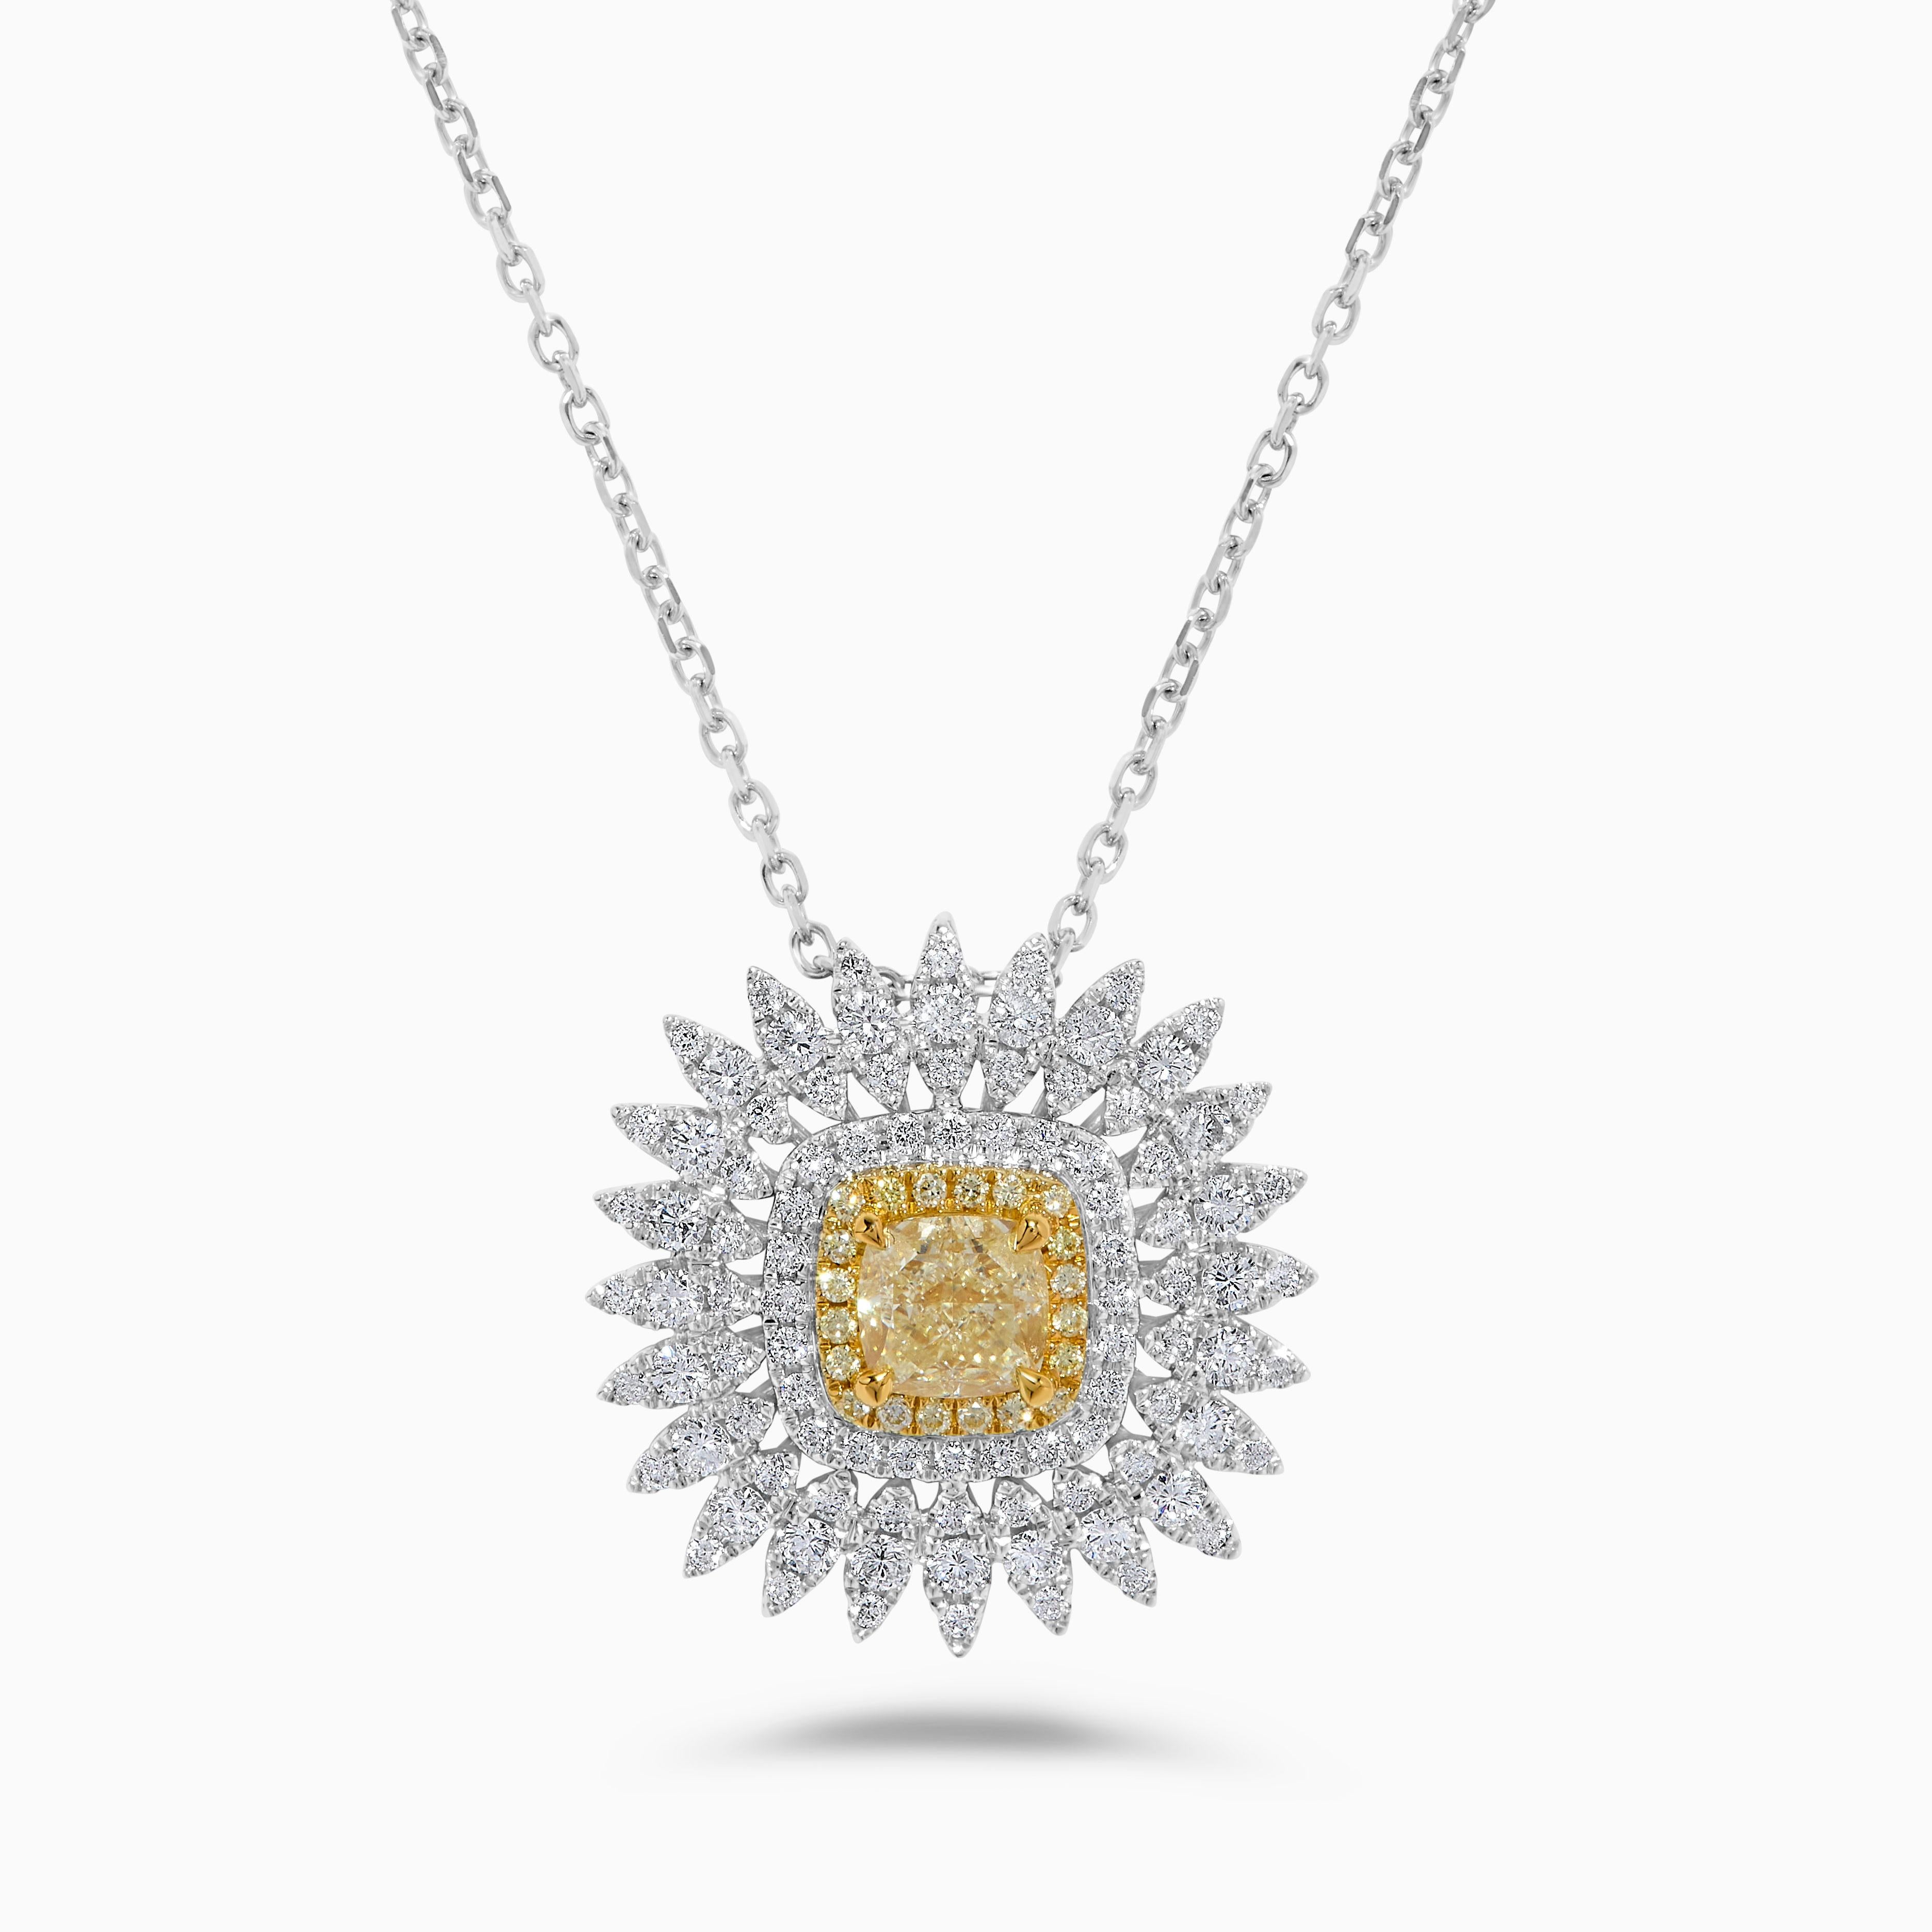 RareGemWorld's intriguing GIA certified diamond pendant. Mounted in a beautiful 18K Yellow and White Gold setting with a natural cushion cut yellow diamond. The yellow diamond is surrounded by round natural yellow diamond melee and round natural